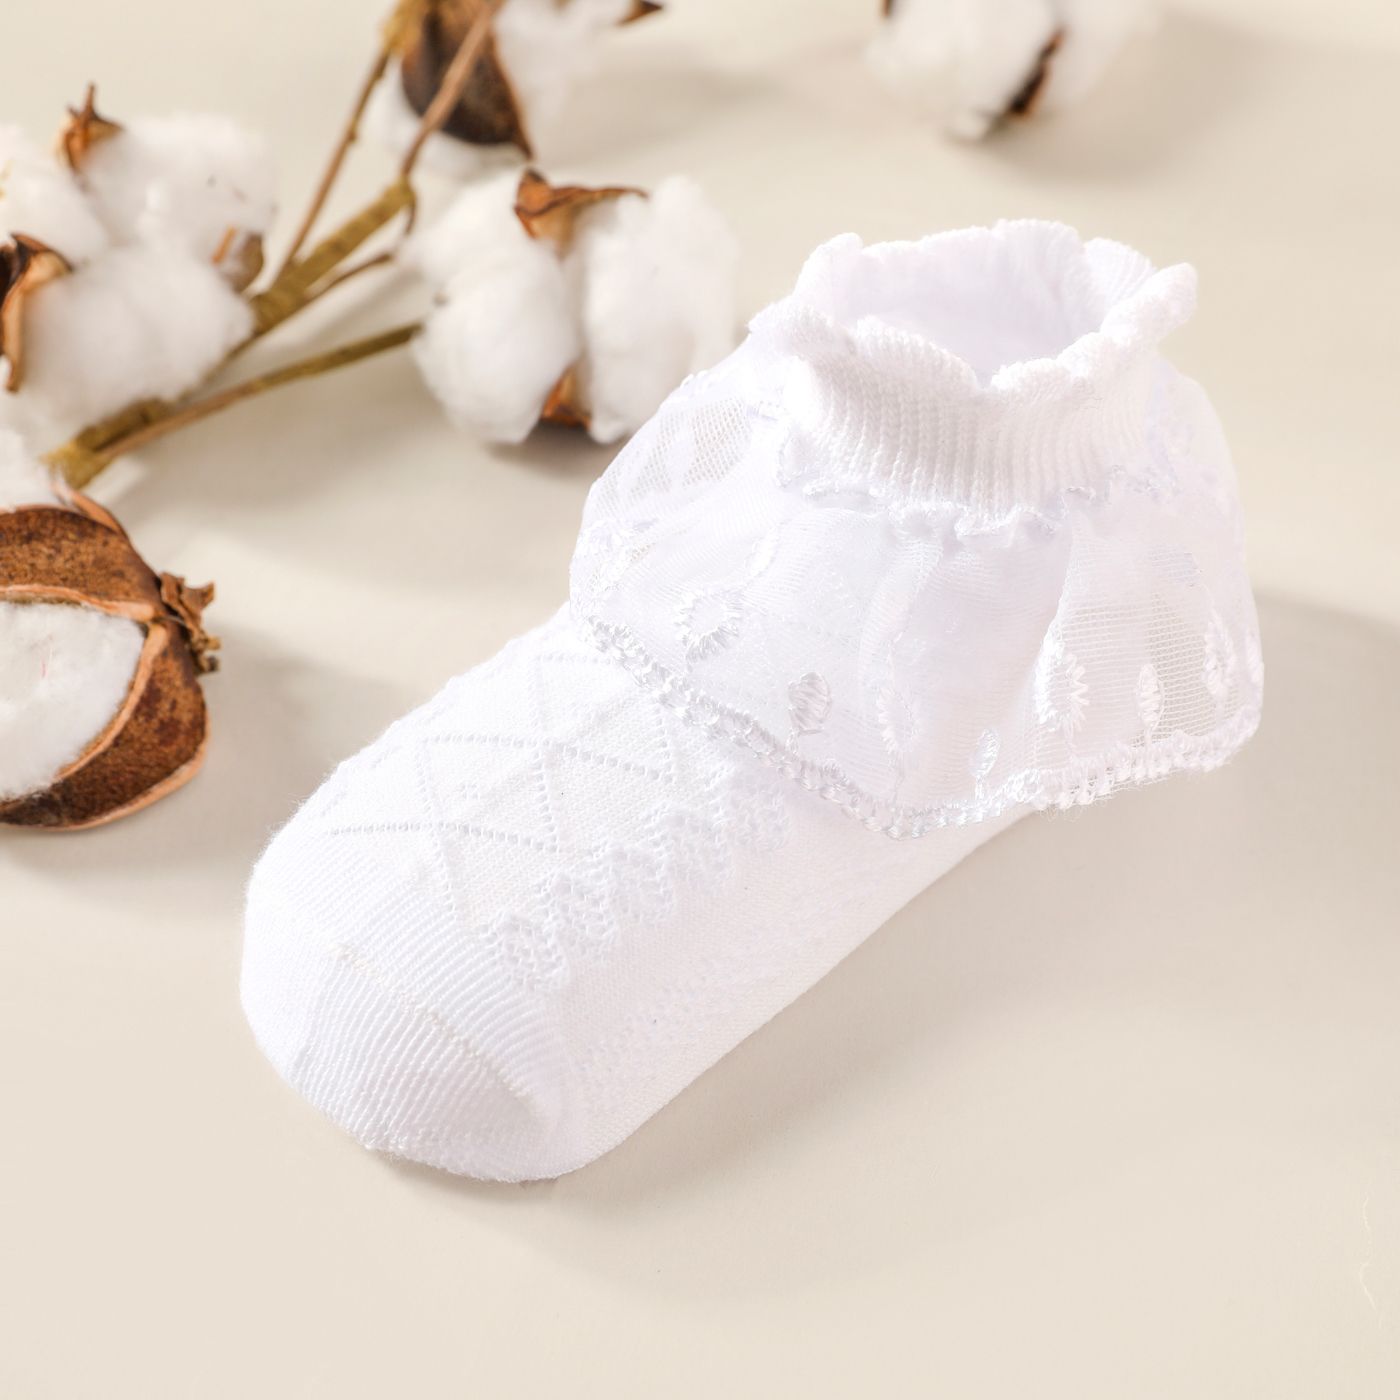 Lace Trim Socks Lace Socks With Ruffles For Women Frilly Ankle Crew Lettuce  Socks YH